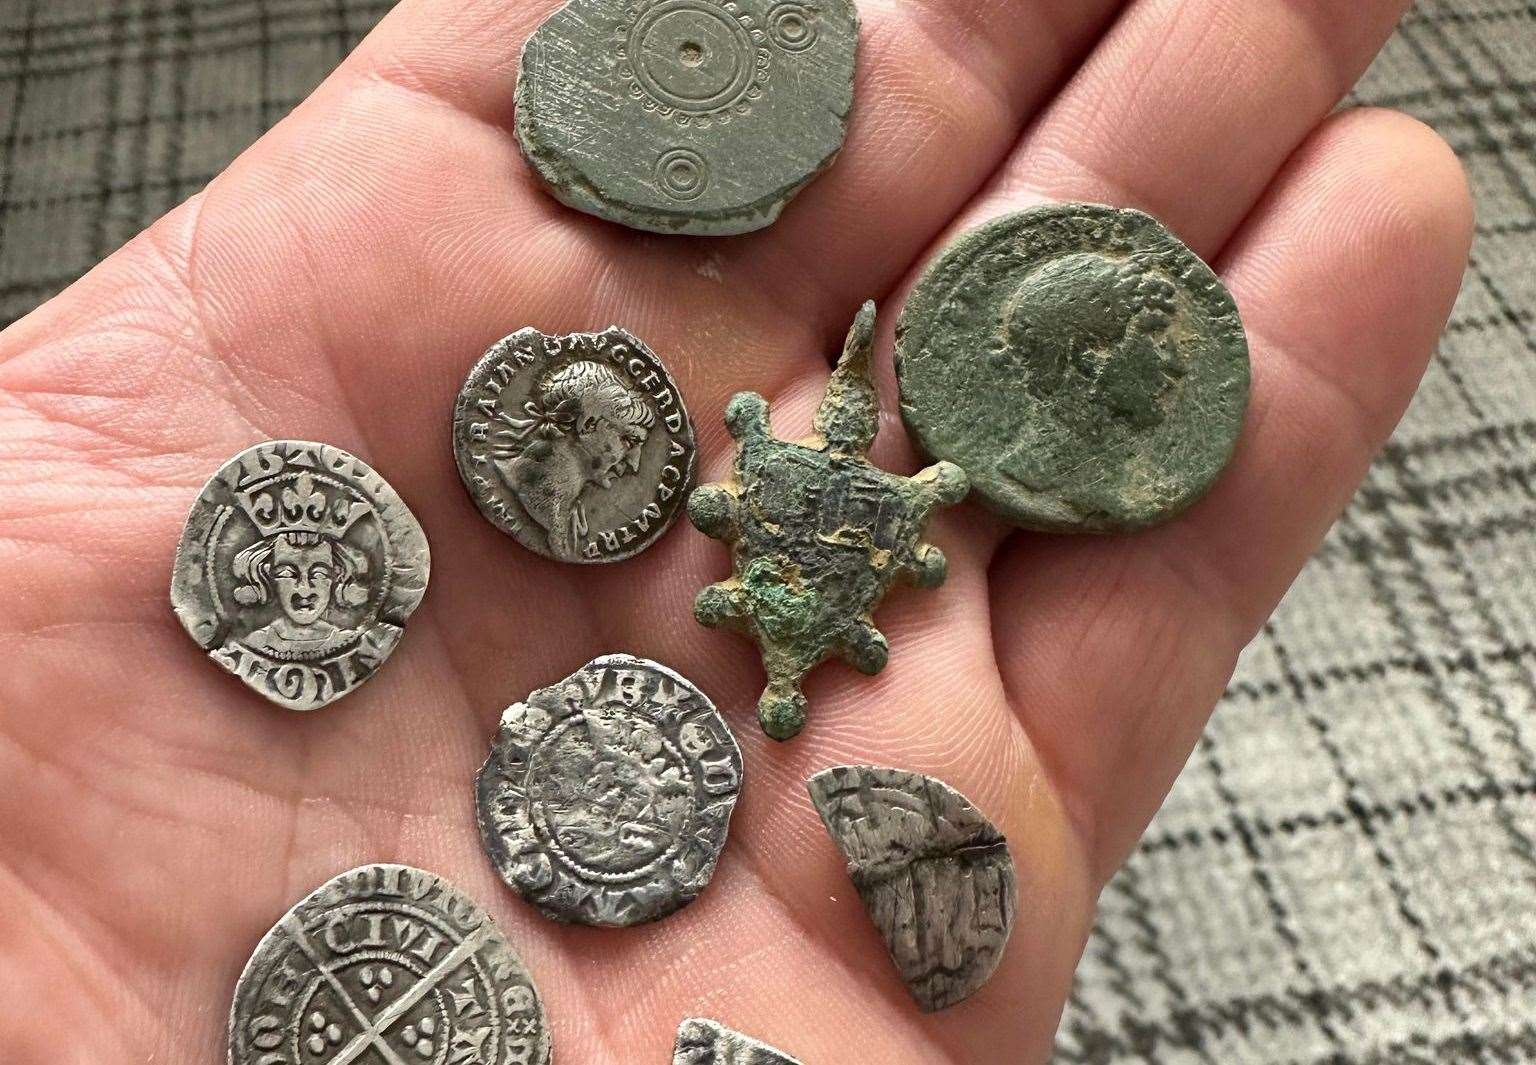 Various Roman and Medieval coins alongside a Saxon Disc brooch and a heraldic pendant found by Brendan